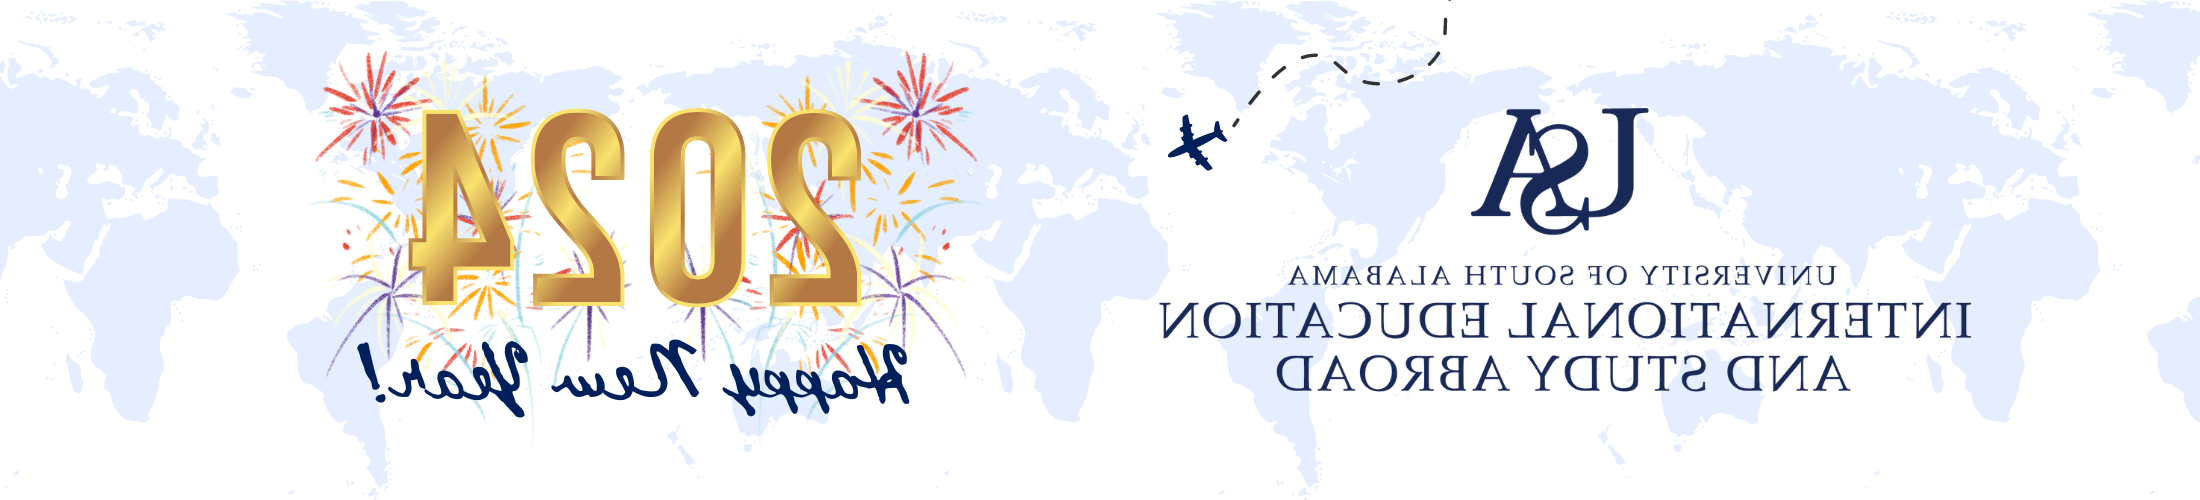 USA International Education and Study Abroad 2024 Happy New Year